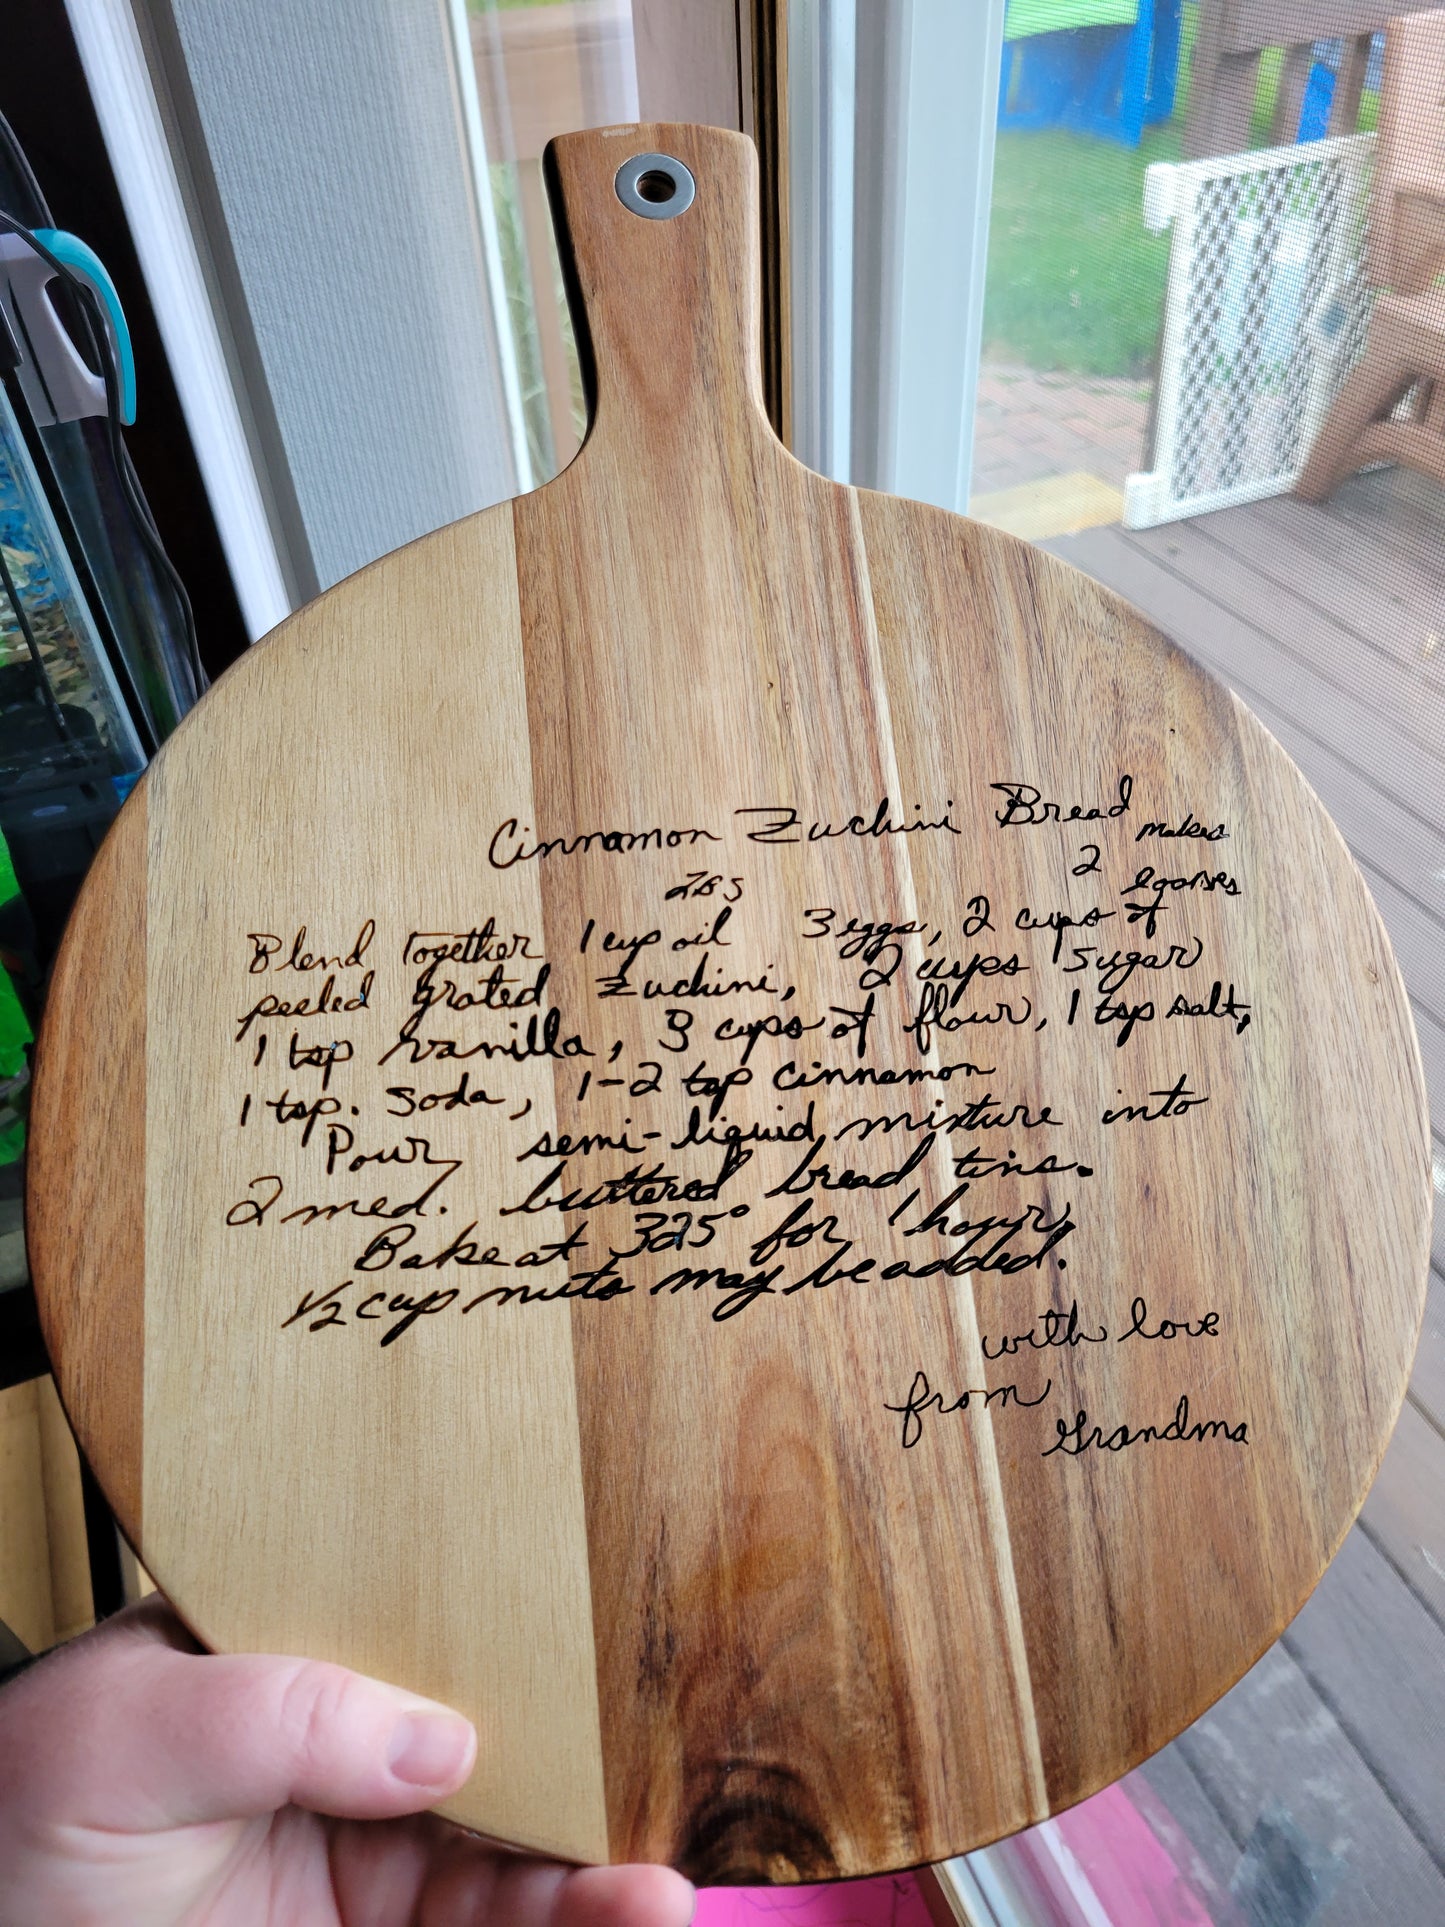 Personalized Cutting Board for the Best Grandma Ever! - The